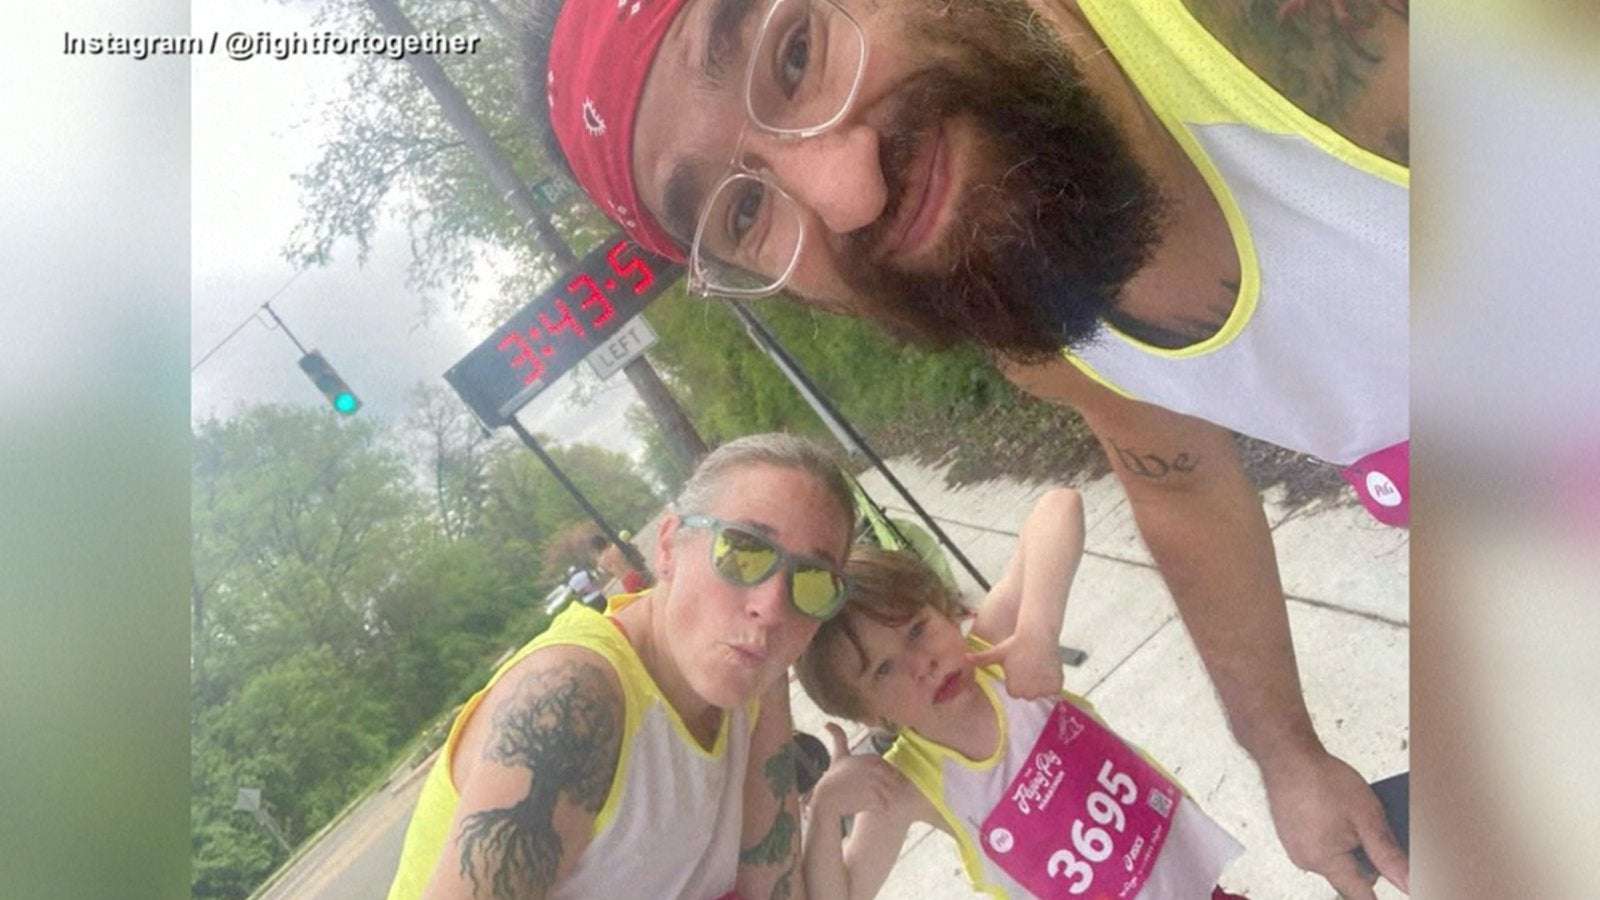 image for Family of 6-year-old who ran marathon visited by child protective services, parents speak out